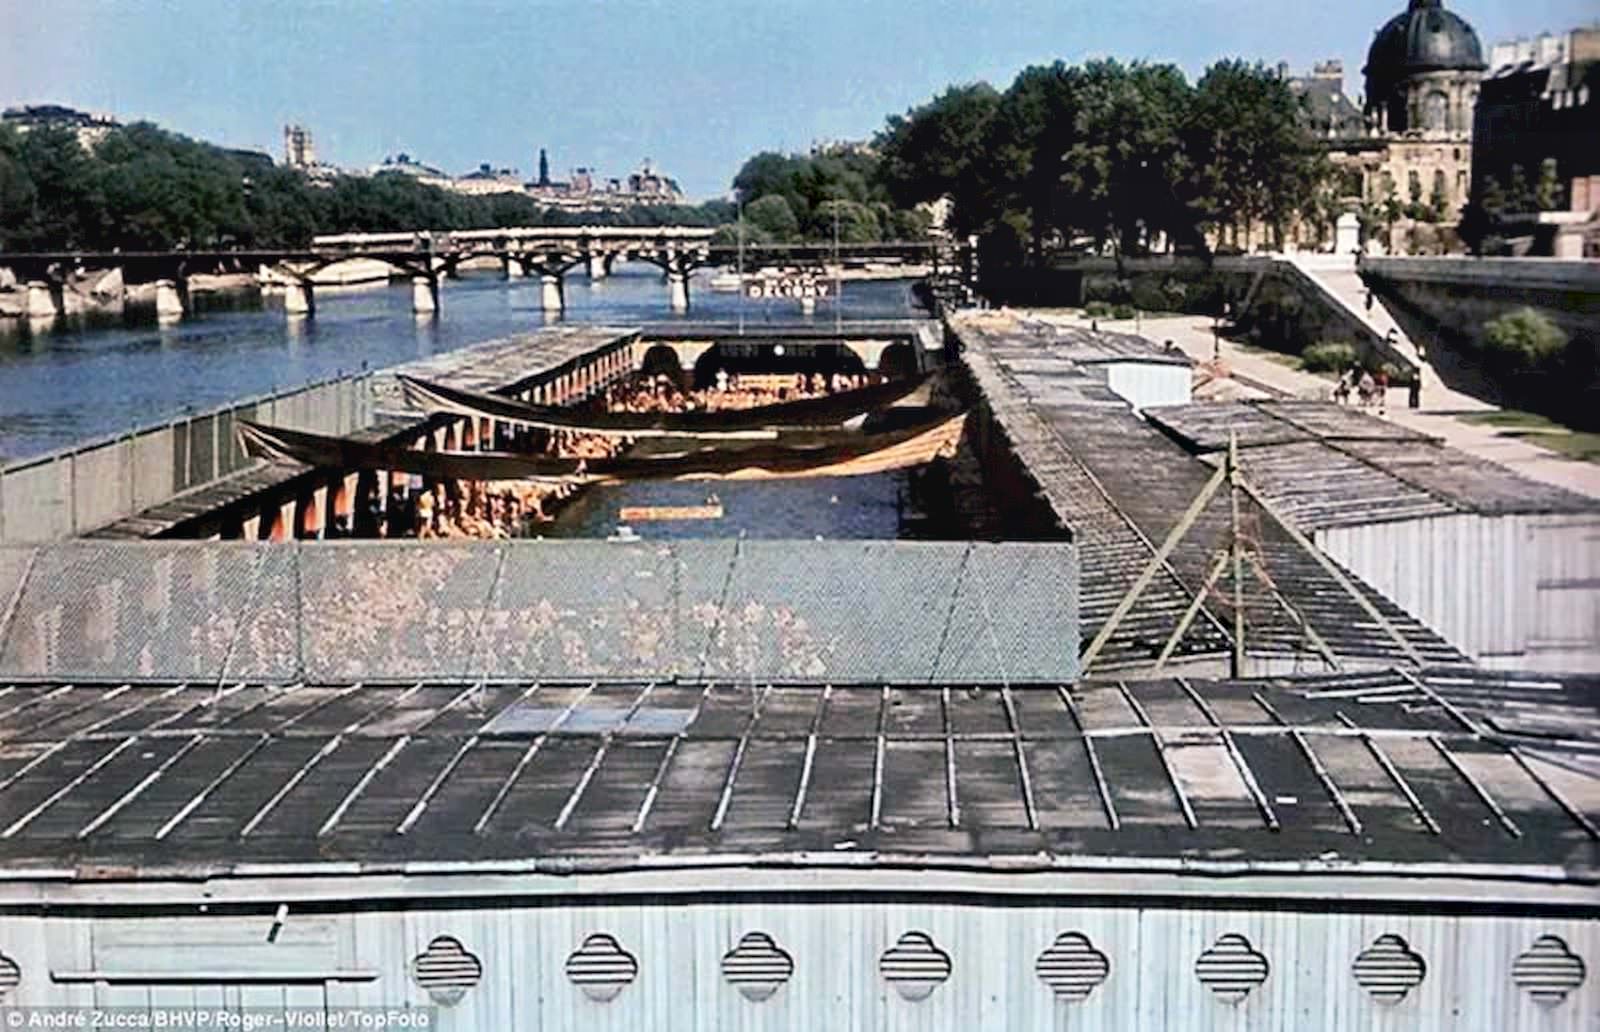 A part of the Seine is pontooned off into a swimming pool, which is filled with hundreds of Parisians grabbing a chance to cool off in the summer heat.